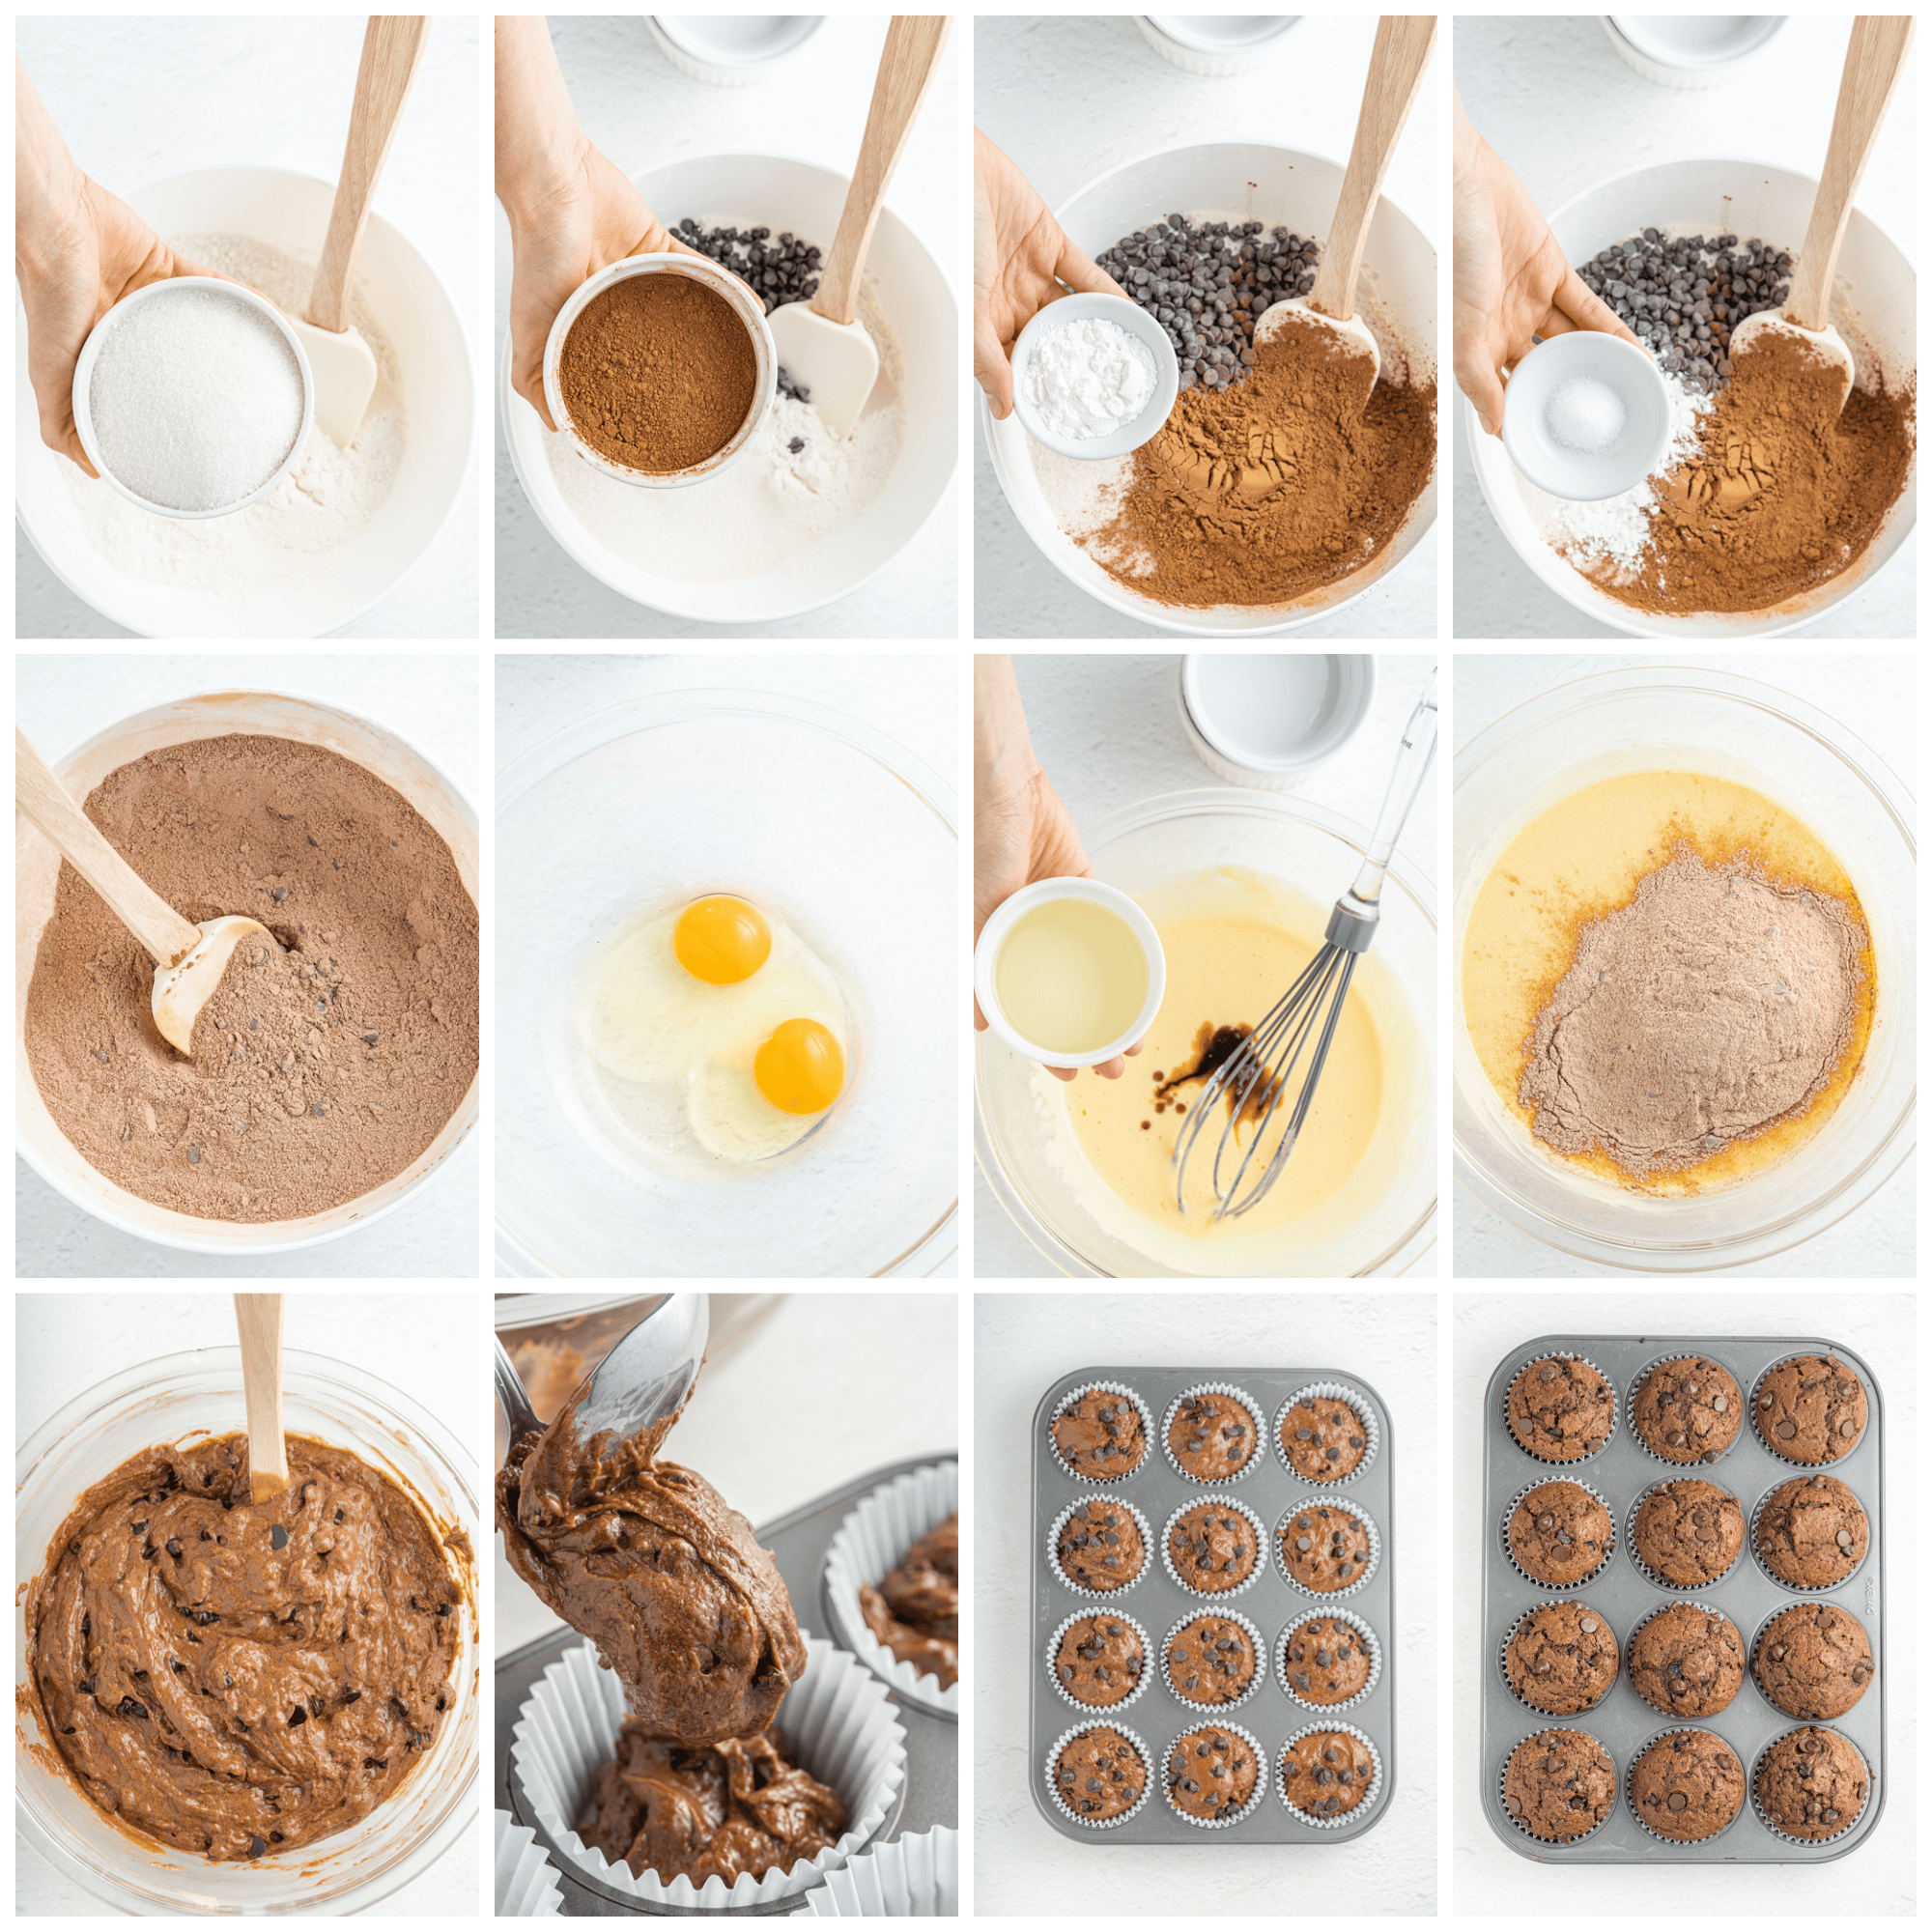 A collage image showing the ordered steps needed to make chocolate muffins with chocolate chips.